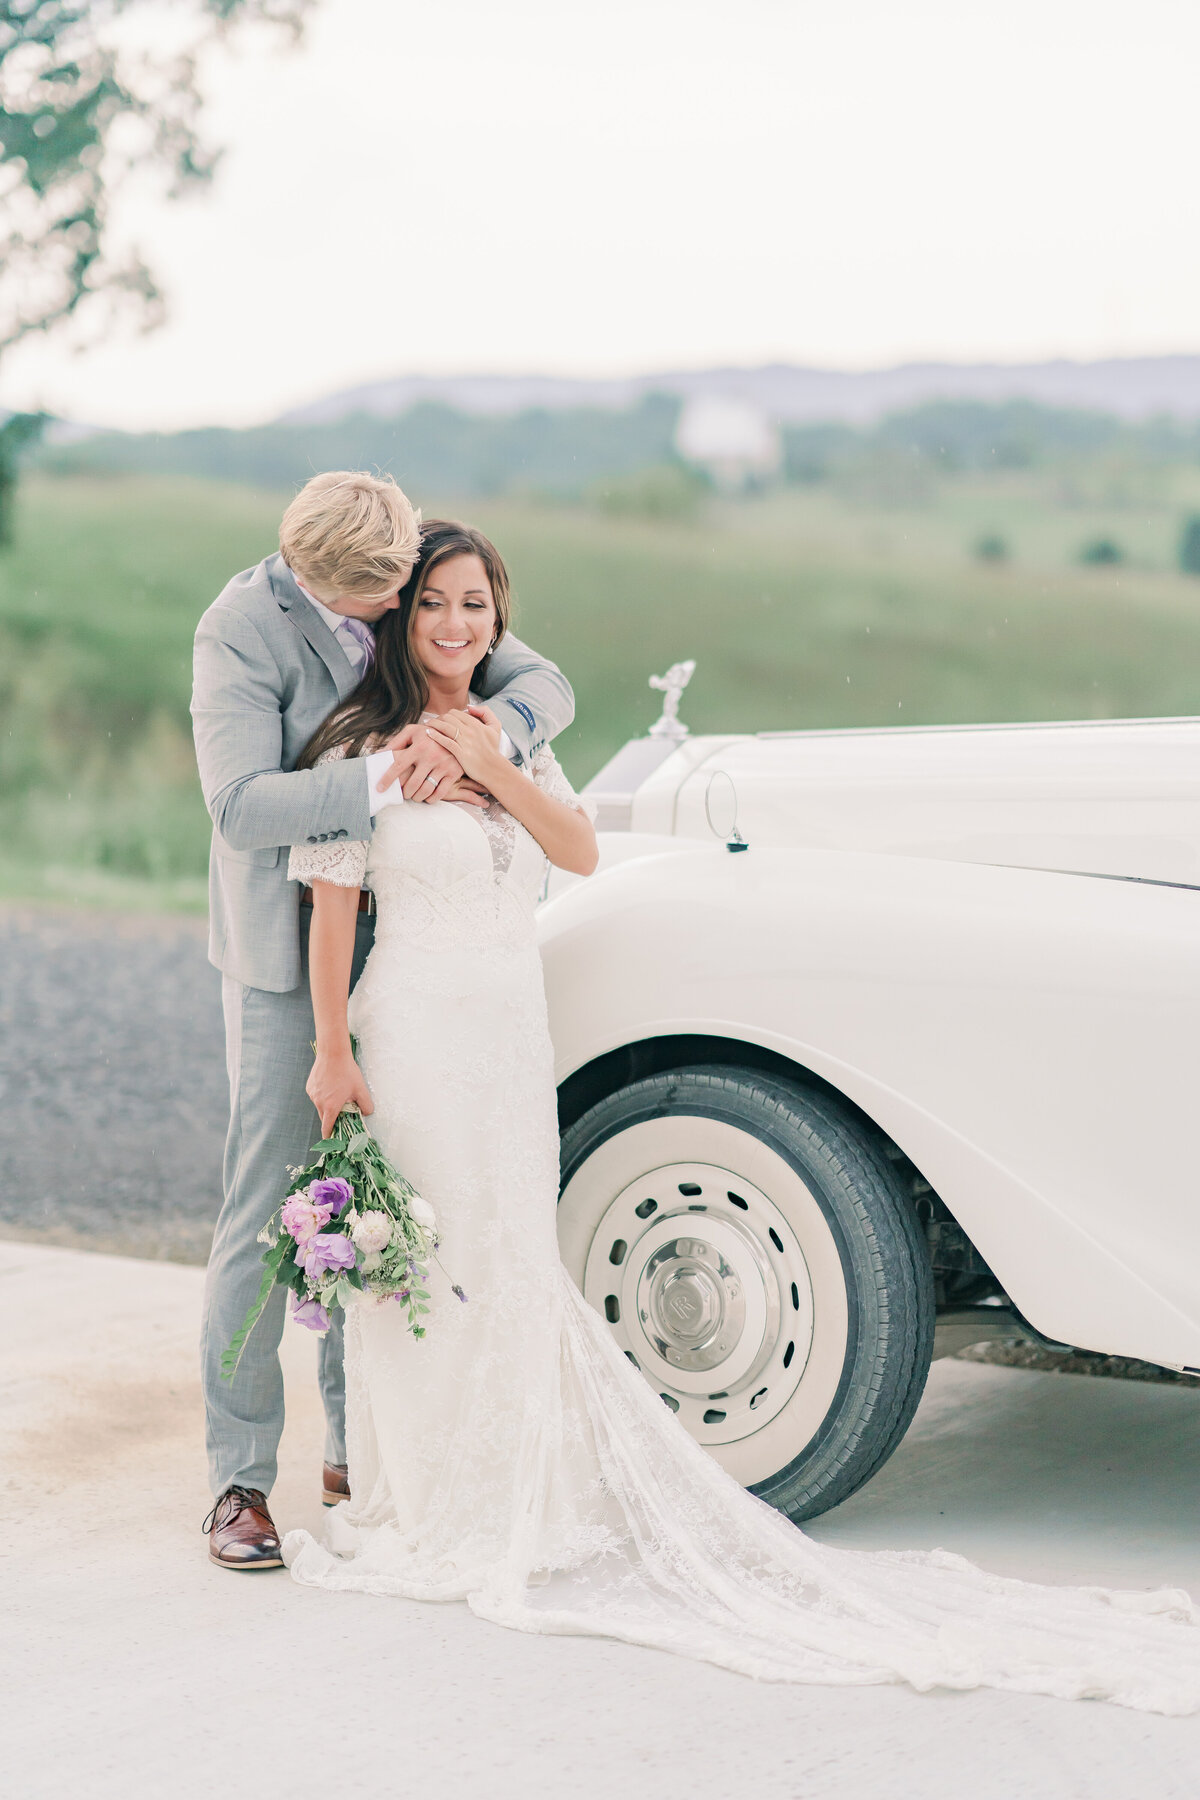 Couple embrace on their wedding day next to rolls royce